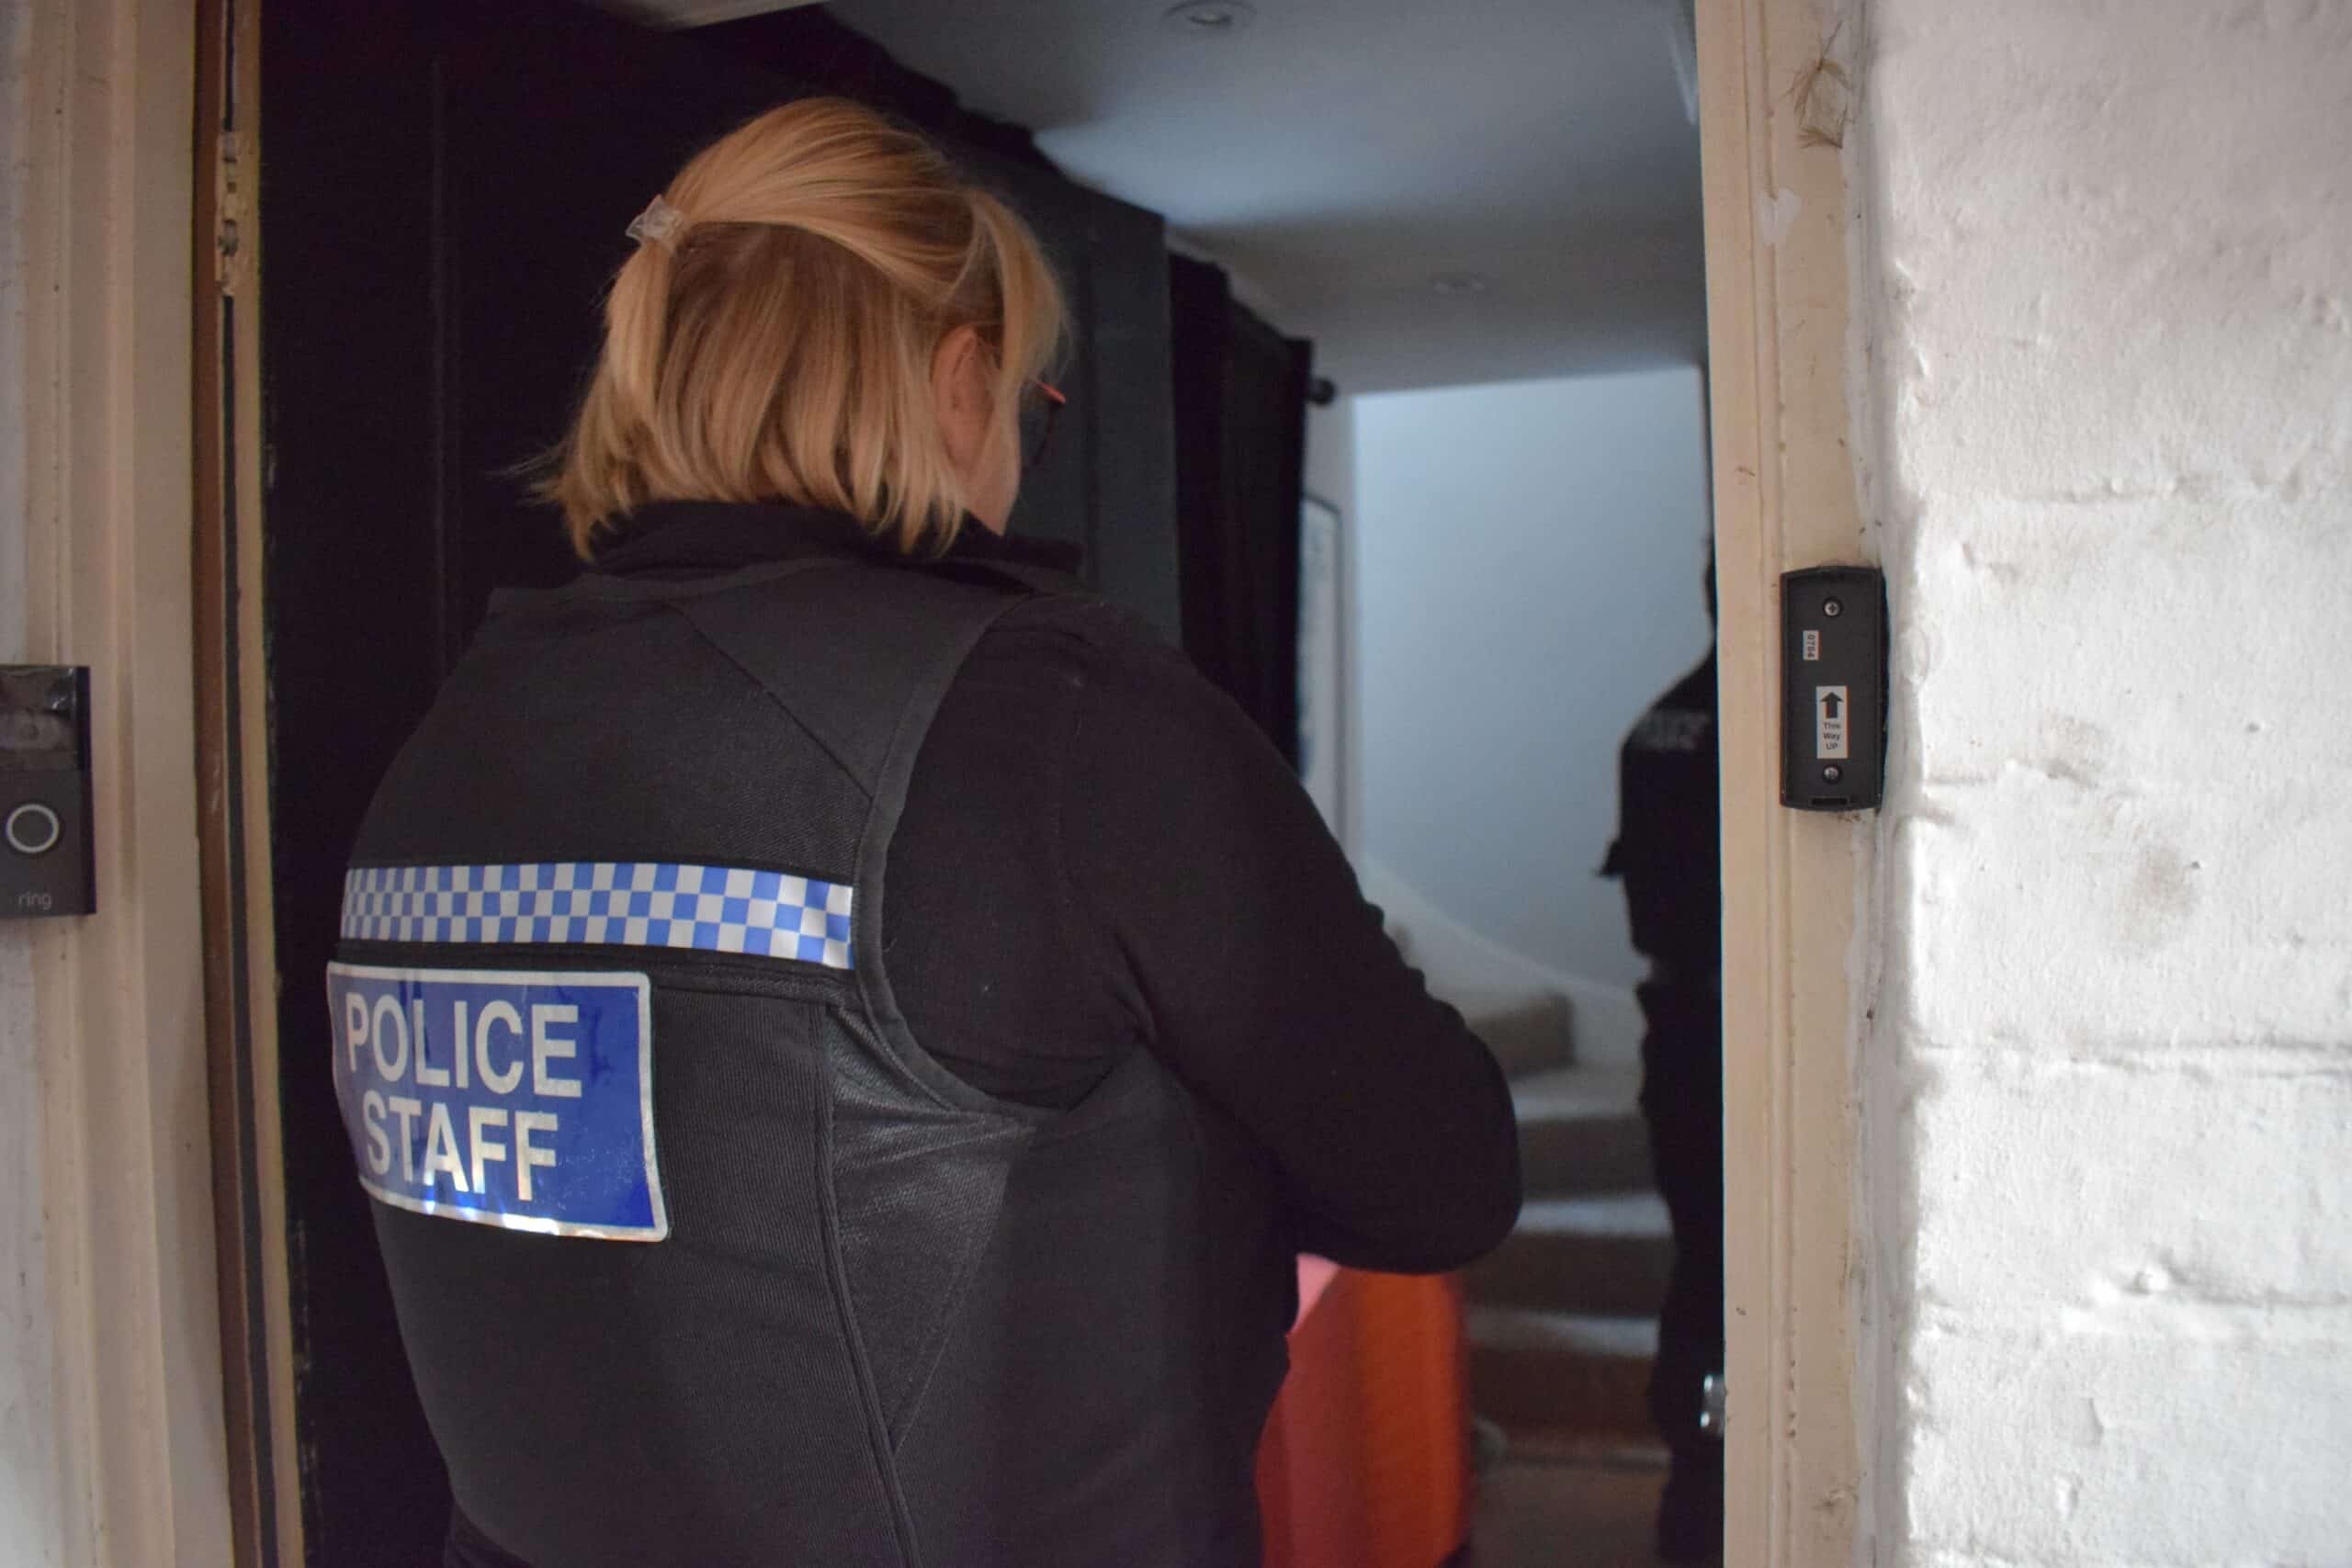 Police and Crime Commissioner Lisa Townsend watches from a front door as Surrey Police officers execute a warrant at a property linked to possible county lines drug dealing.